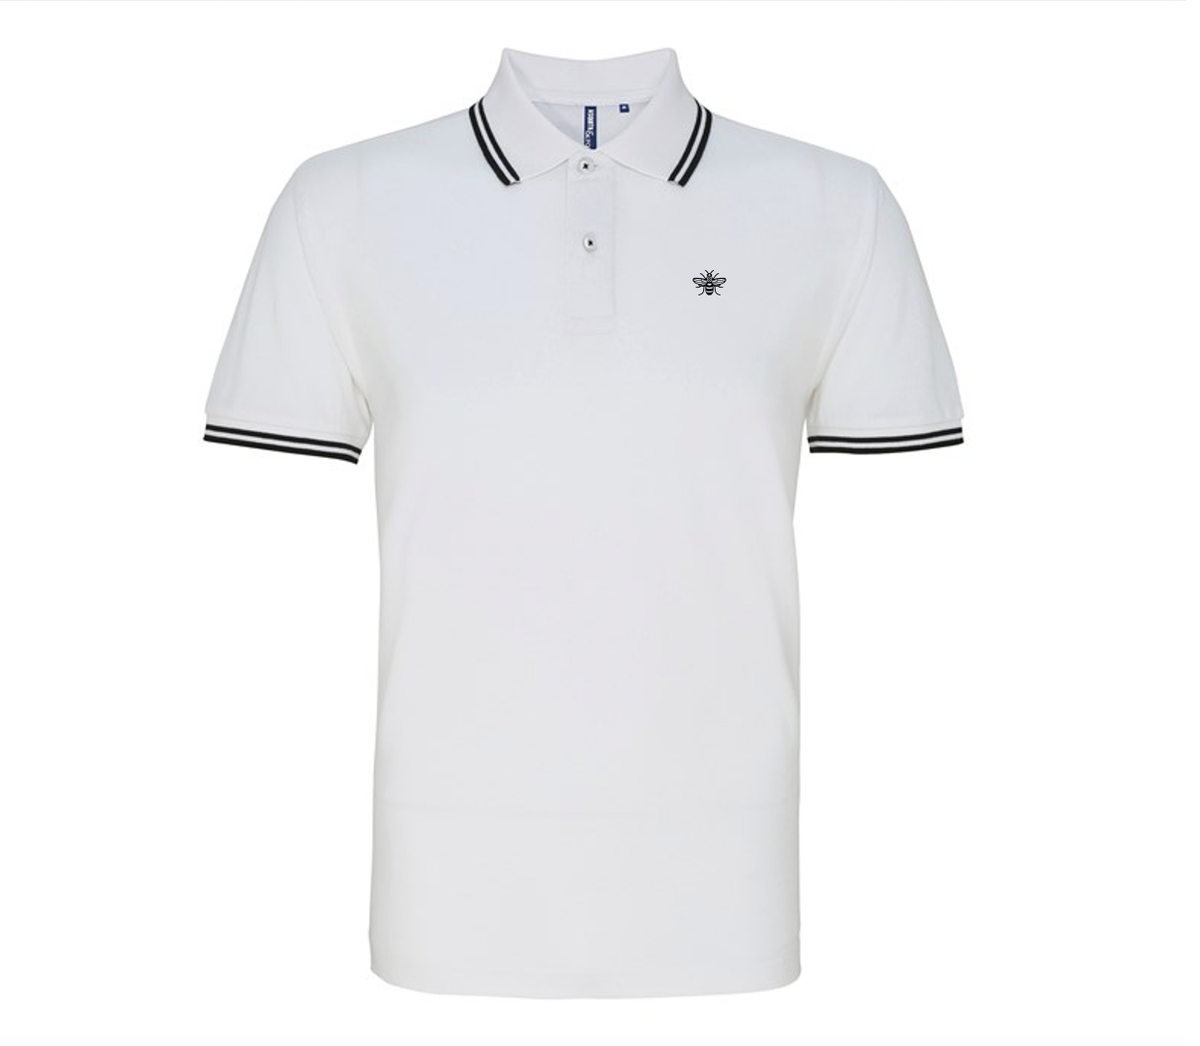 BeeManc Embroidered Bee Tipped Polo - White/Black